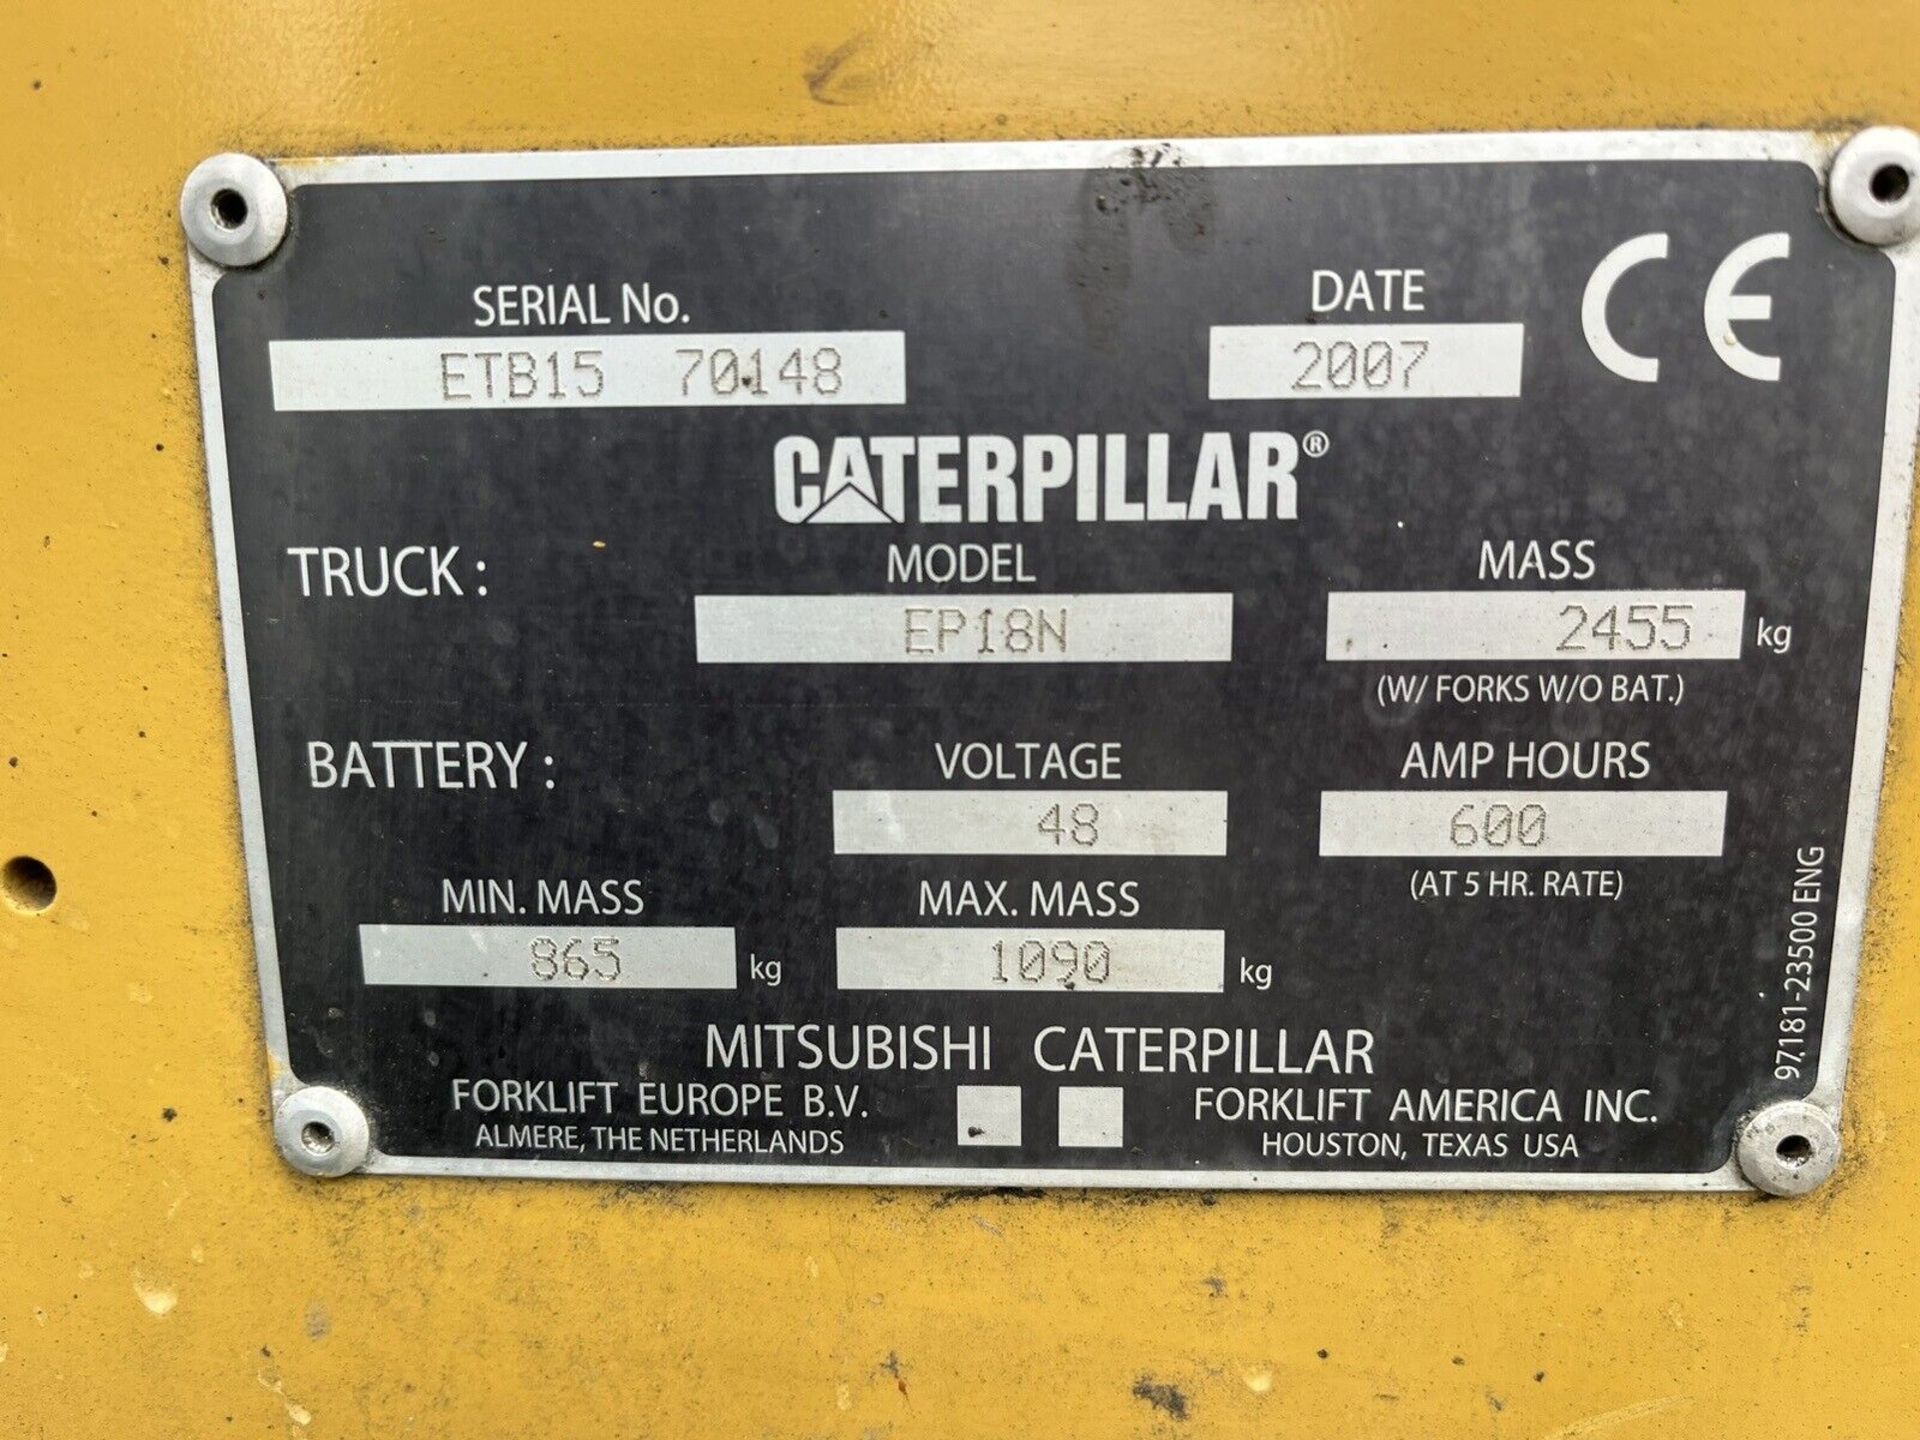 CATERPILLAR 1.8 Electric Forklift Truck Container Spec - Image 4 of 5